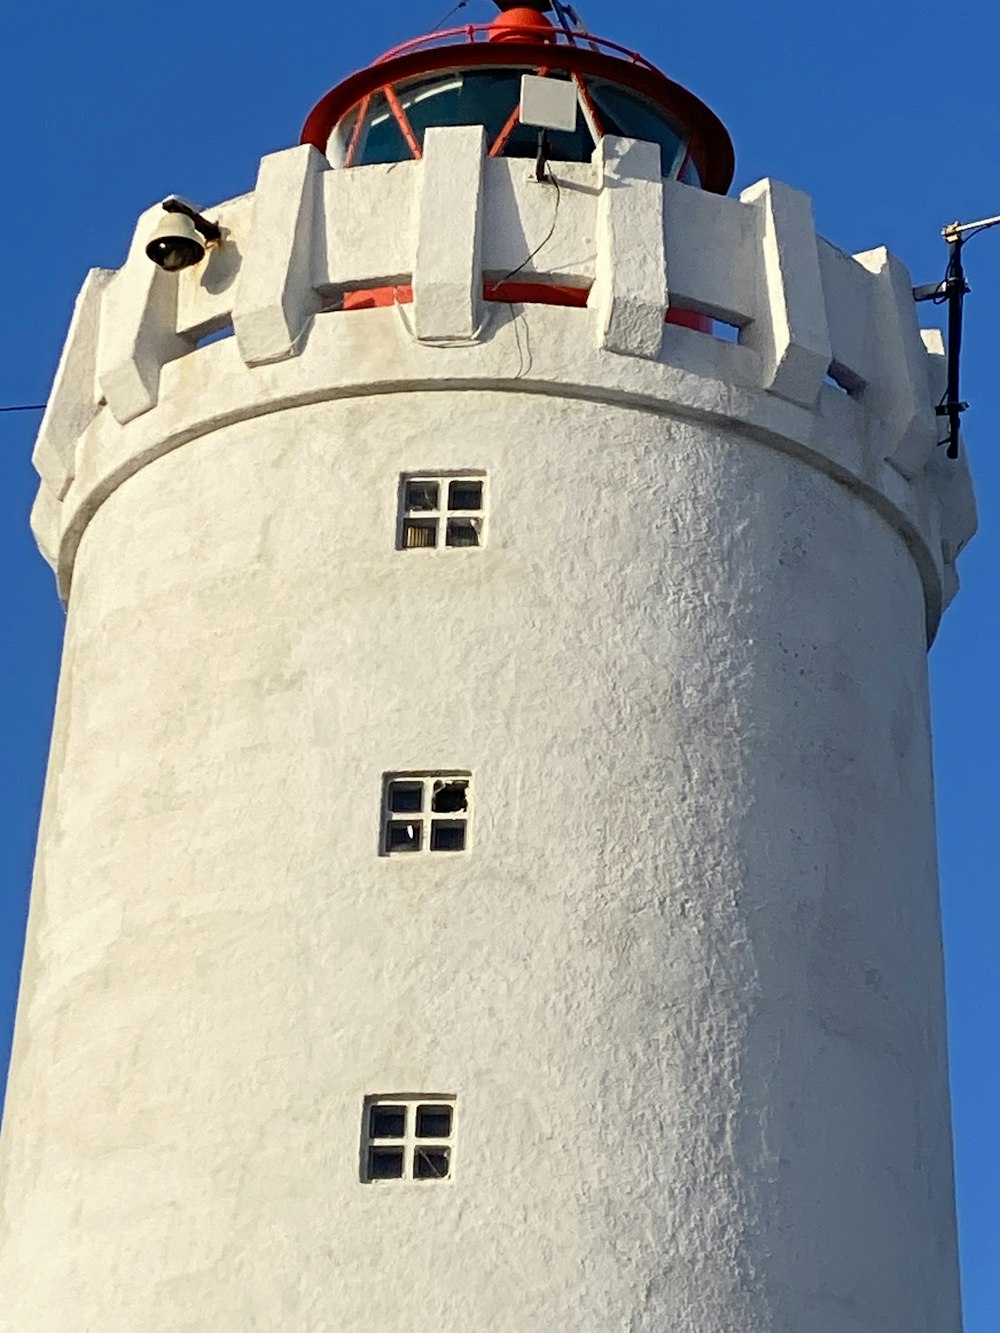 a tall white tower with a red top